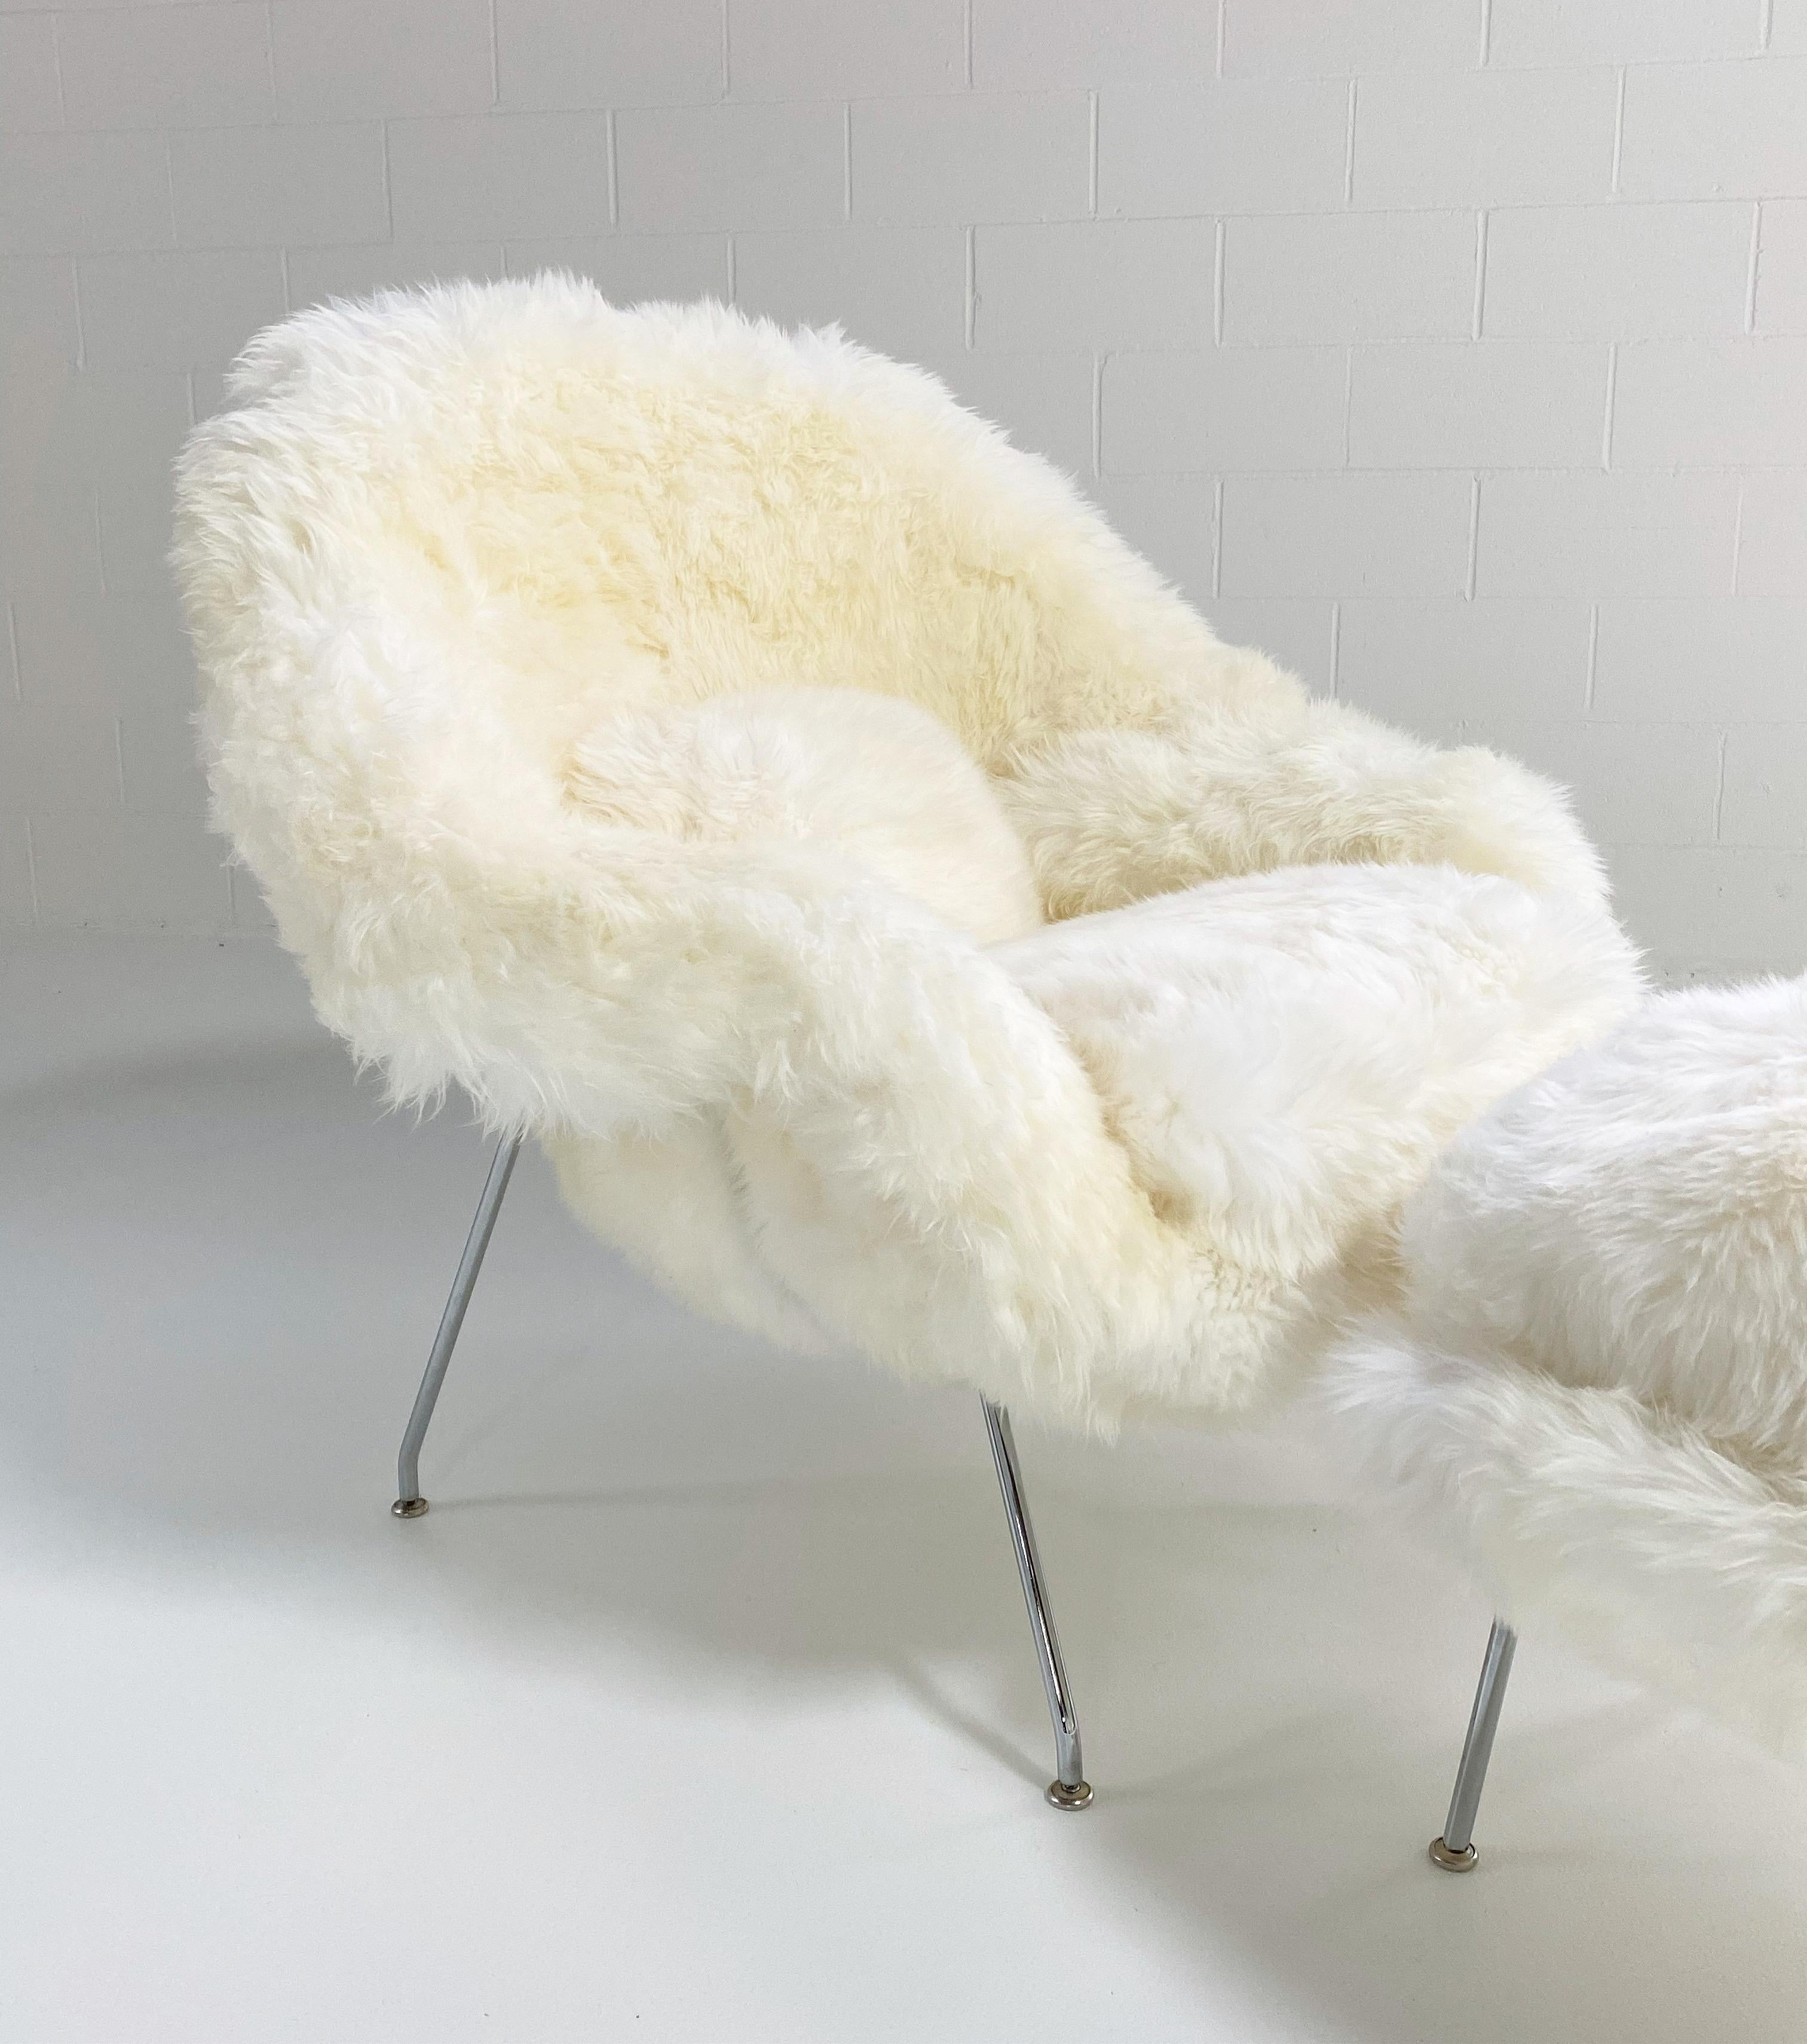 A favorite of the Forsyth design team!

We have an incredible collection of vintage chairs and design icons waiting for a new life. Our upcycled womb chairs are some of our most popular designs. This womb chair and ottoman will be made to order